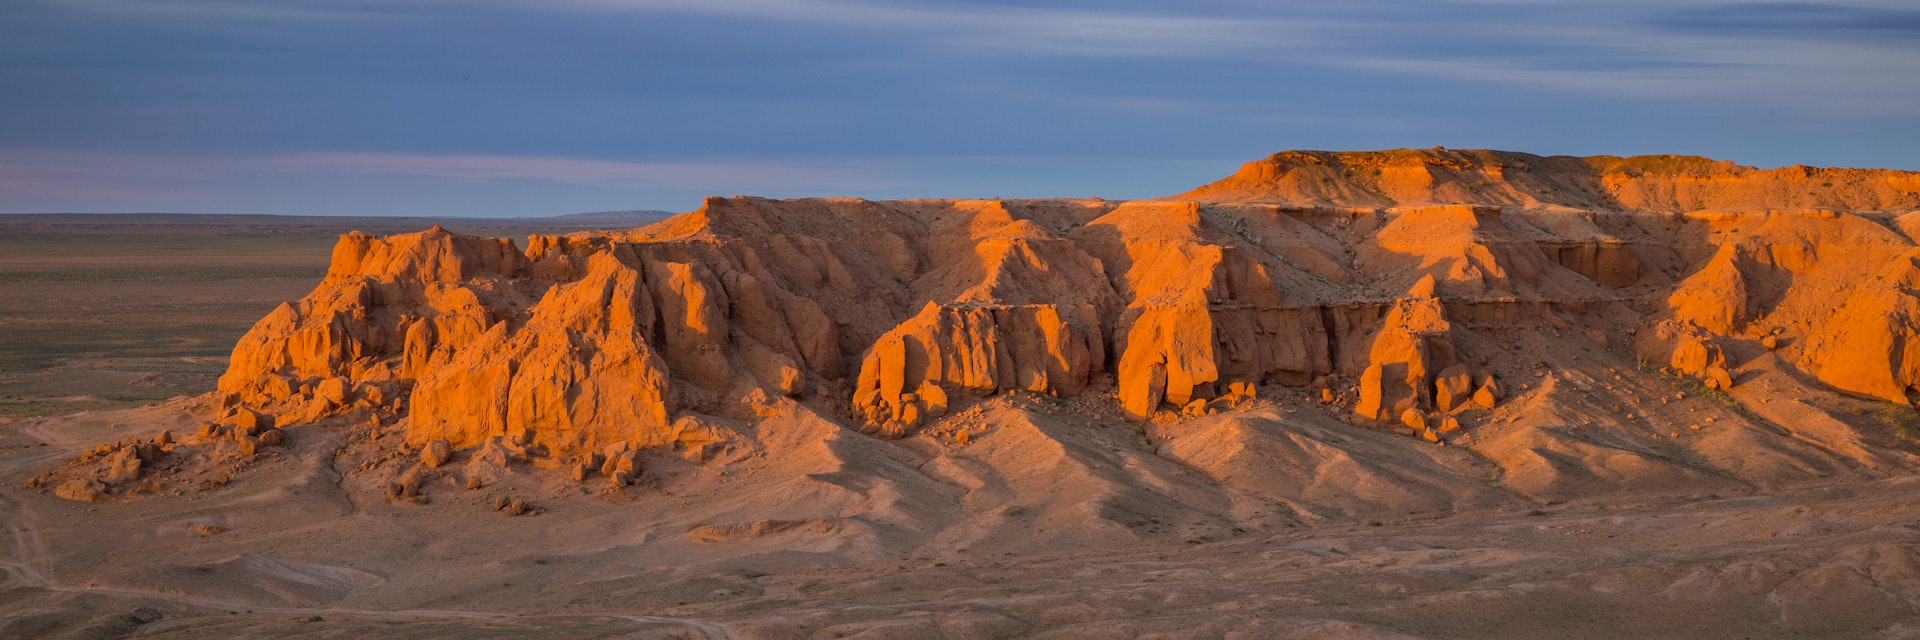 Bayanzag, Flaming Cliffs, Mongolia, Asia; Shutterstock ID 1262892721; your: Sloane Tucker; gl: 65050; netsuite: Online Editorial; full: POI
1262892721